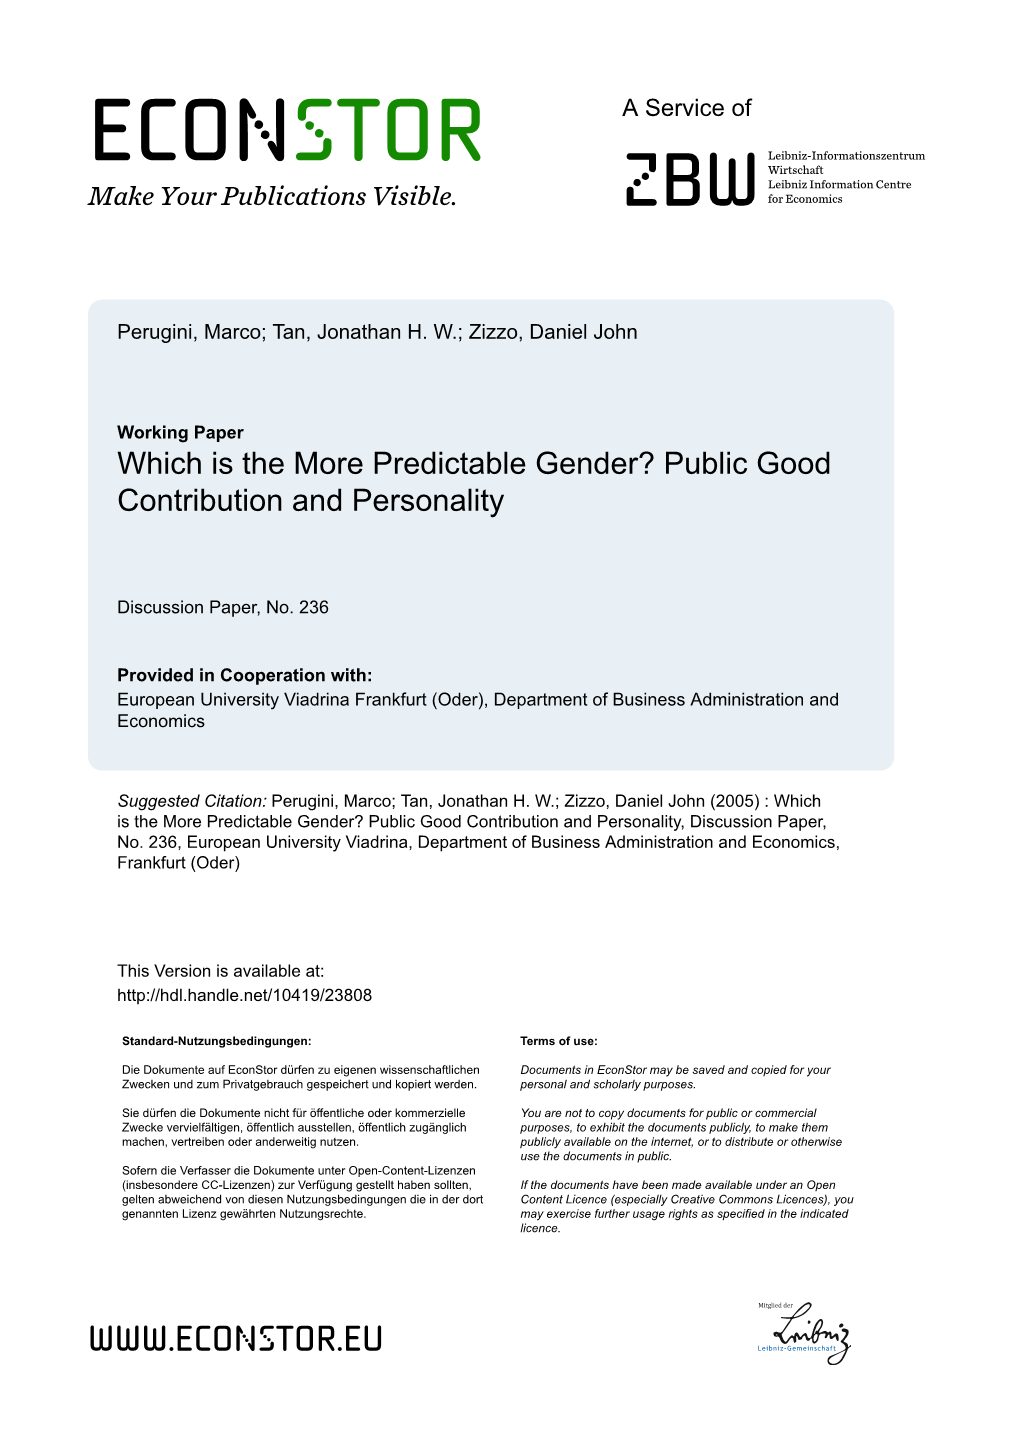 Public Good Contribution and Personality